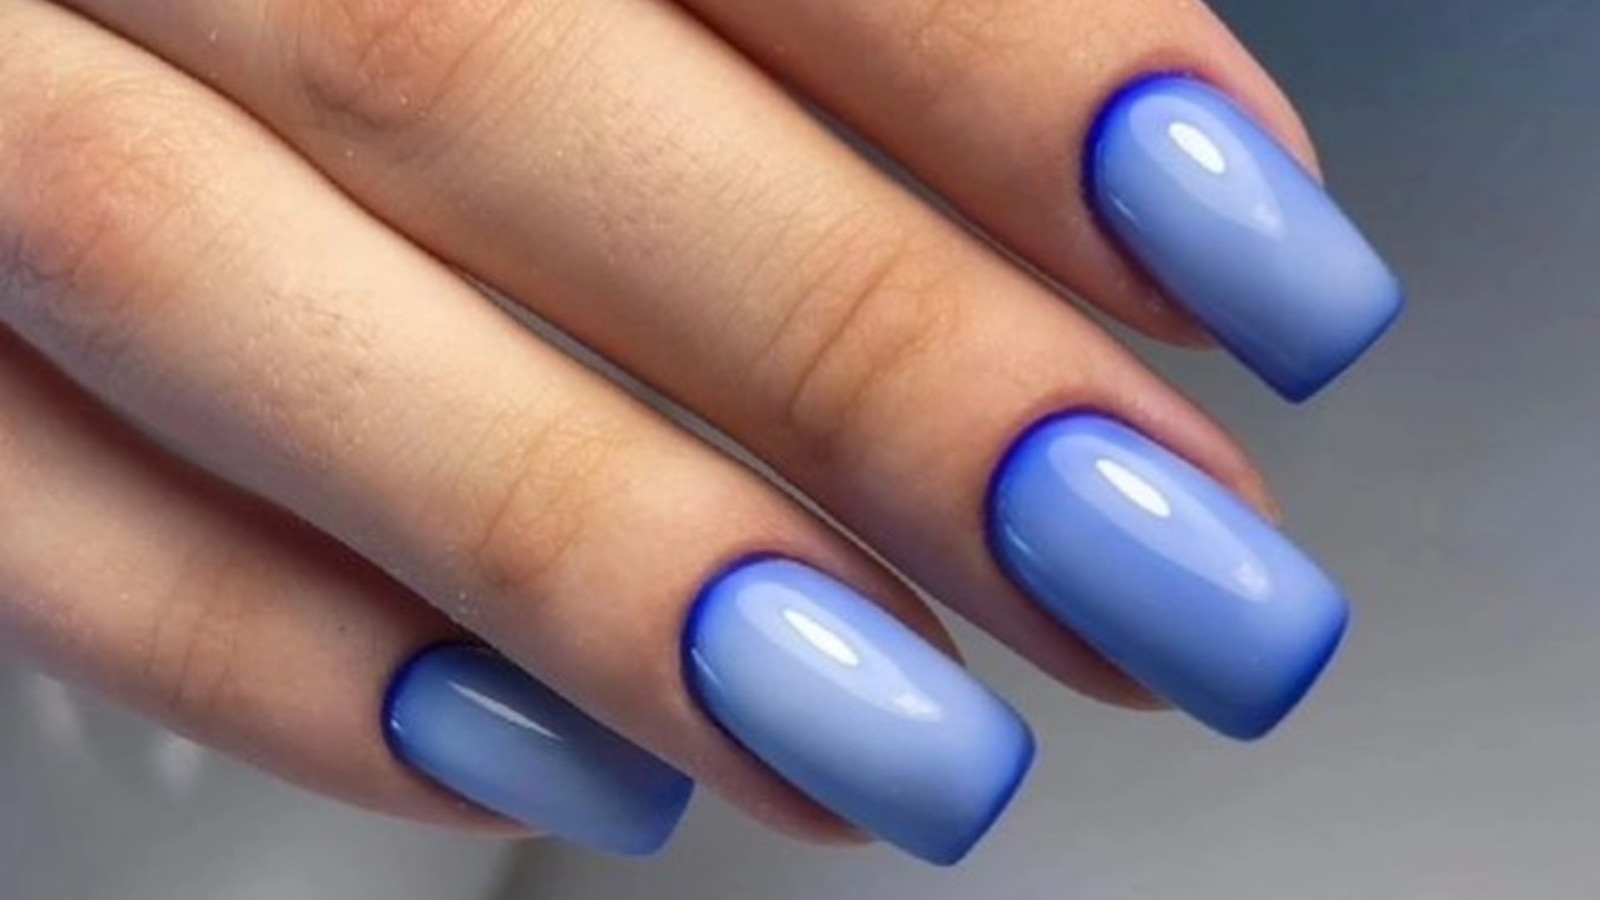 Airbrush Nail Art: This Throwback Trend Is Making A Comeback